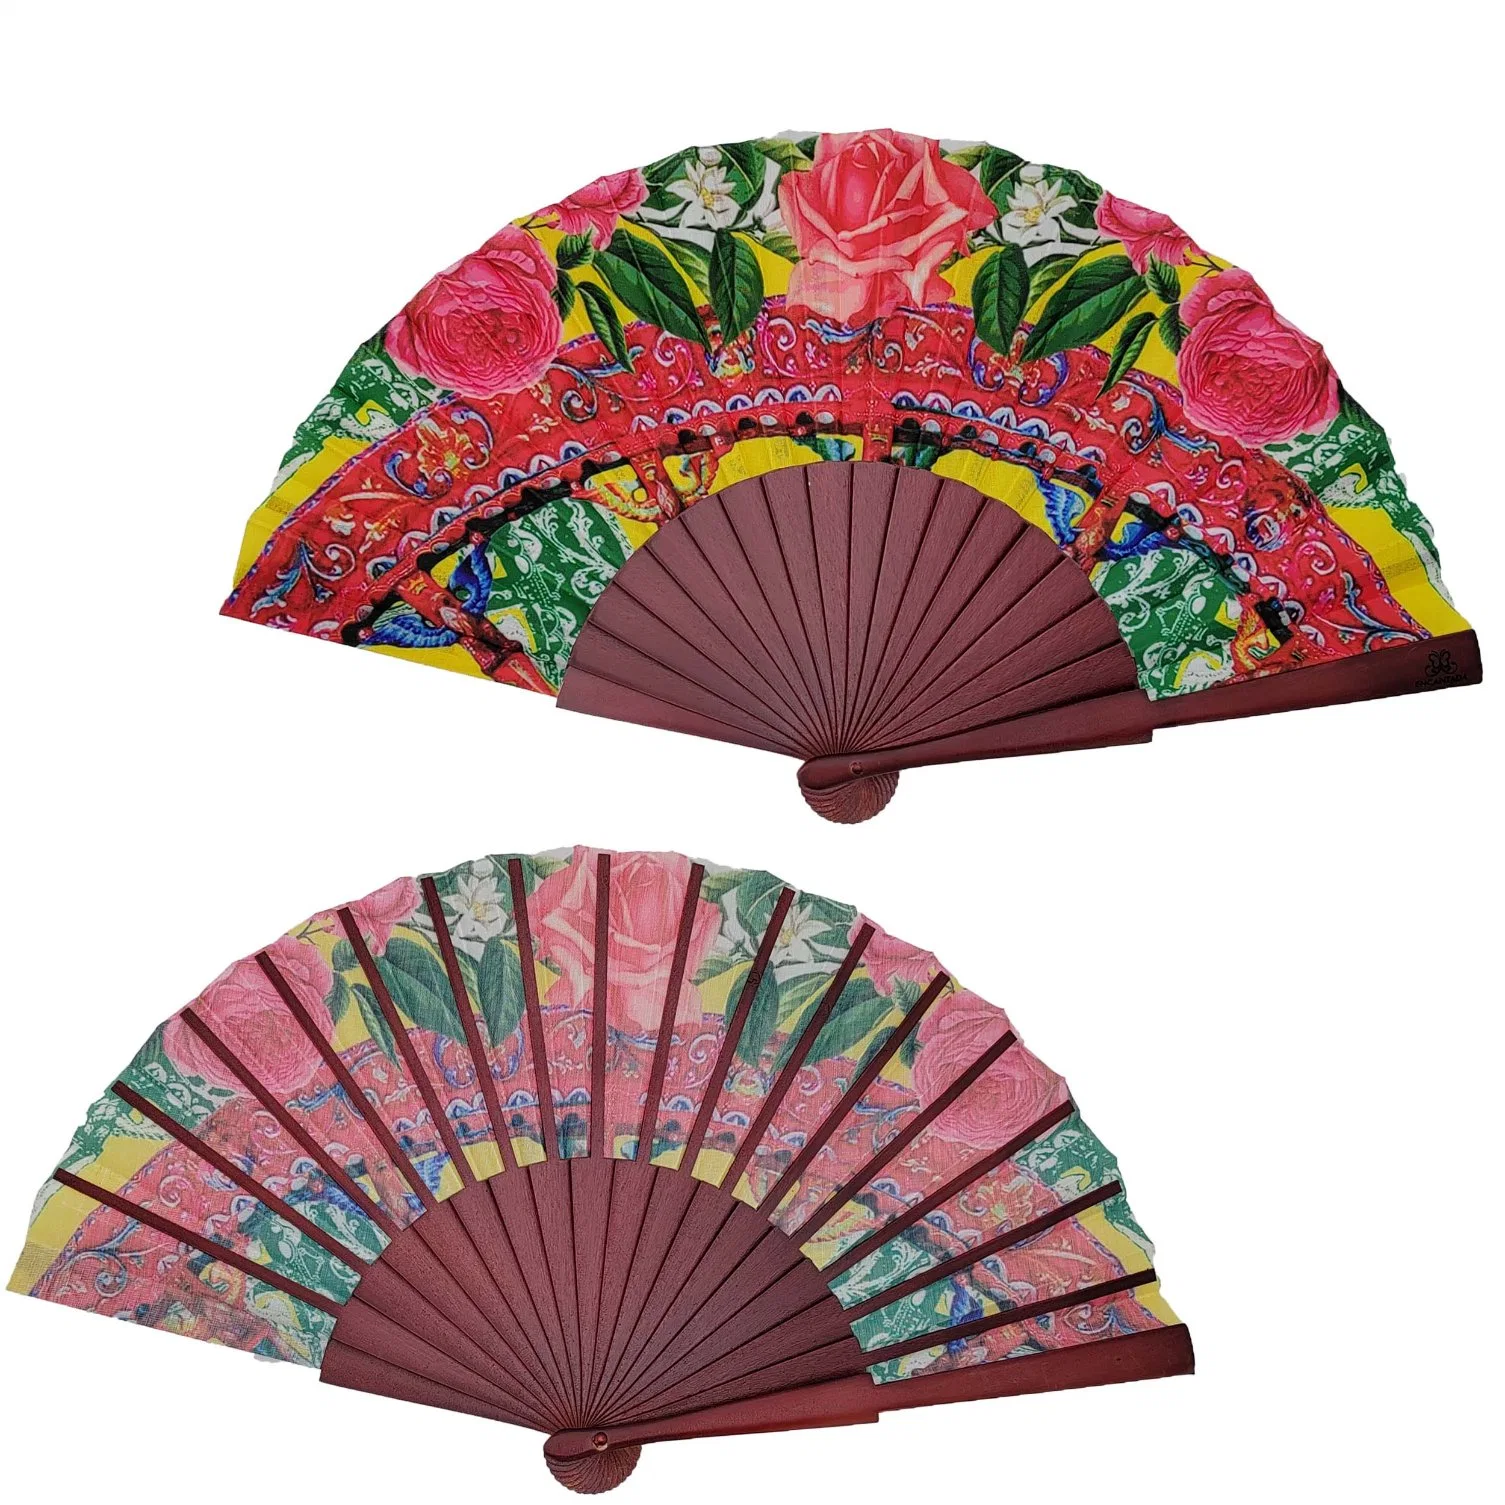 Painted All Color of The Ribs+Customized Fabric Wood Hand Fan for Gift Size 9" 42